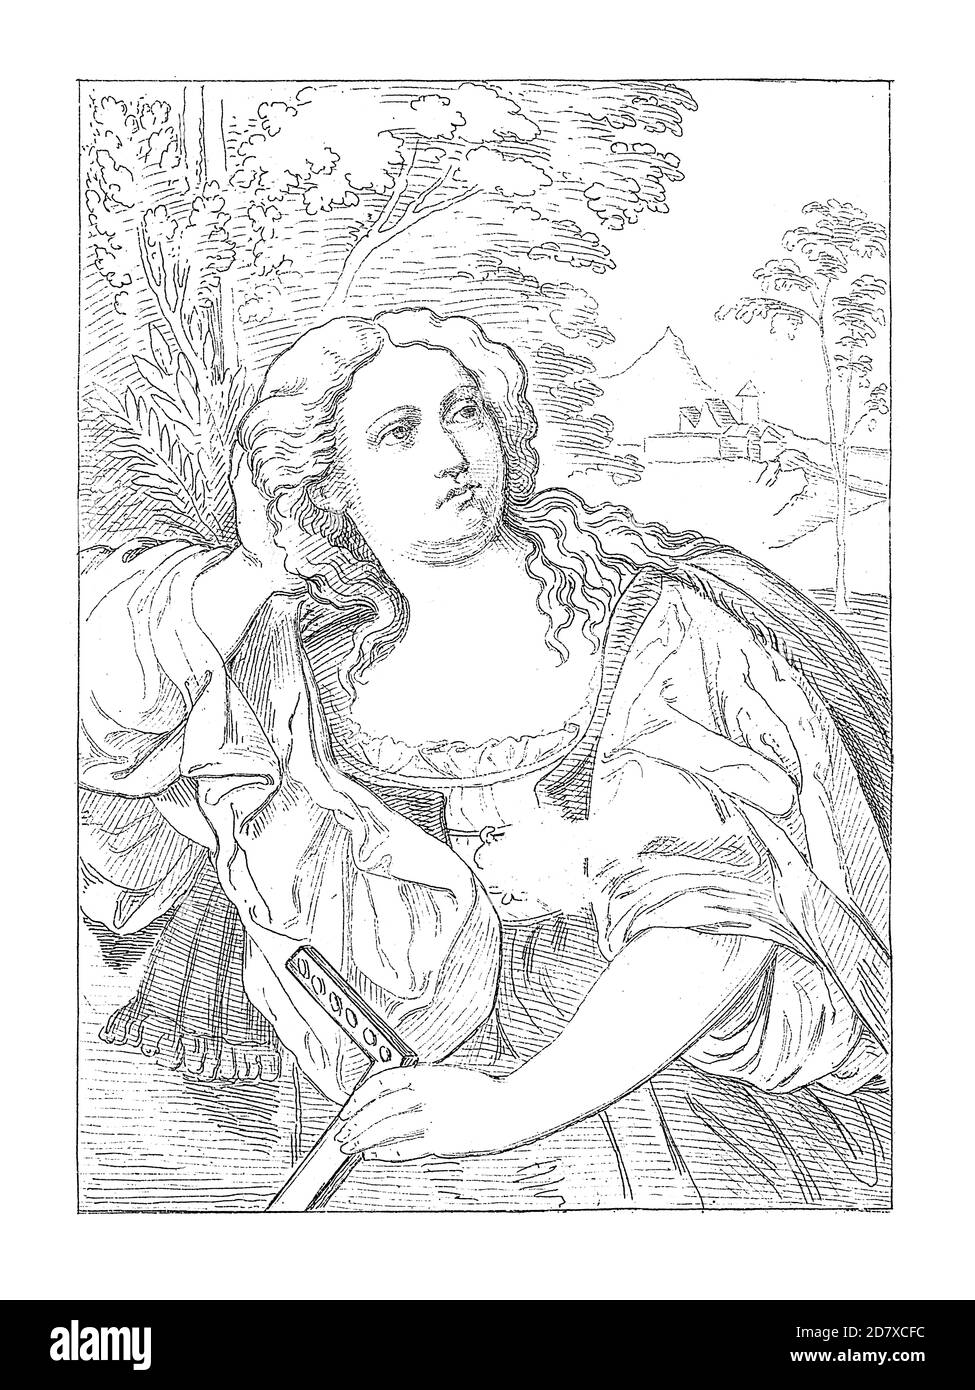 16th century female painter Black and White Stock Photos & Images - Alamy